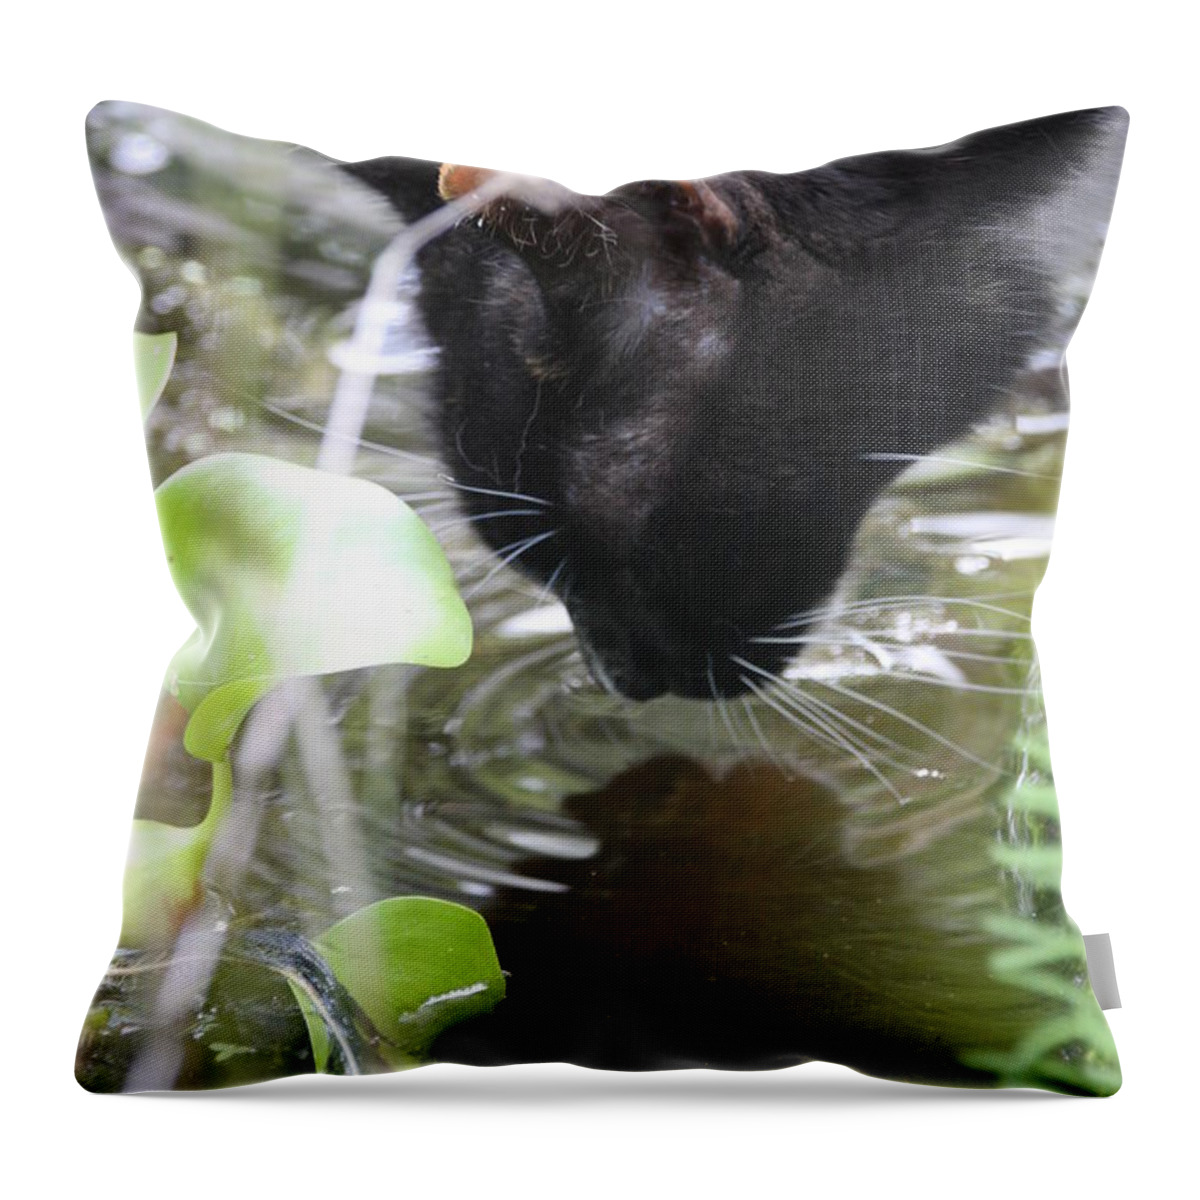 Calico Throw Pillow featuring the photograph Drinking Kitty by Wendy Coulson